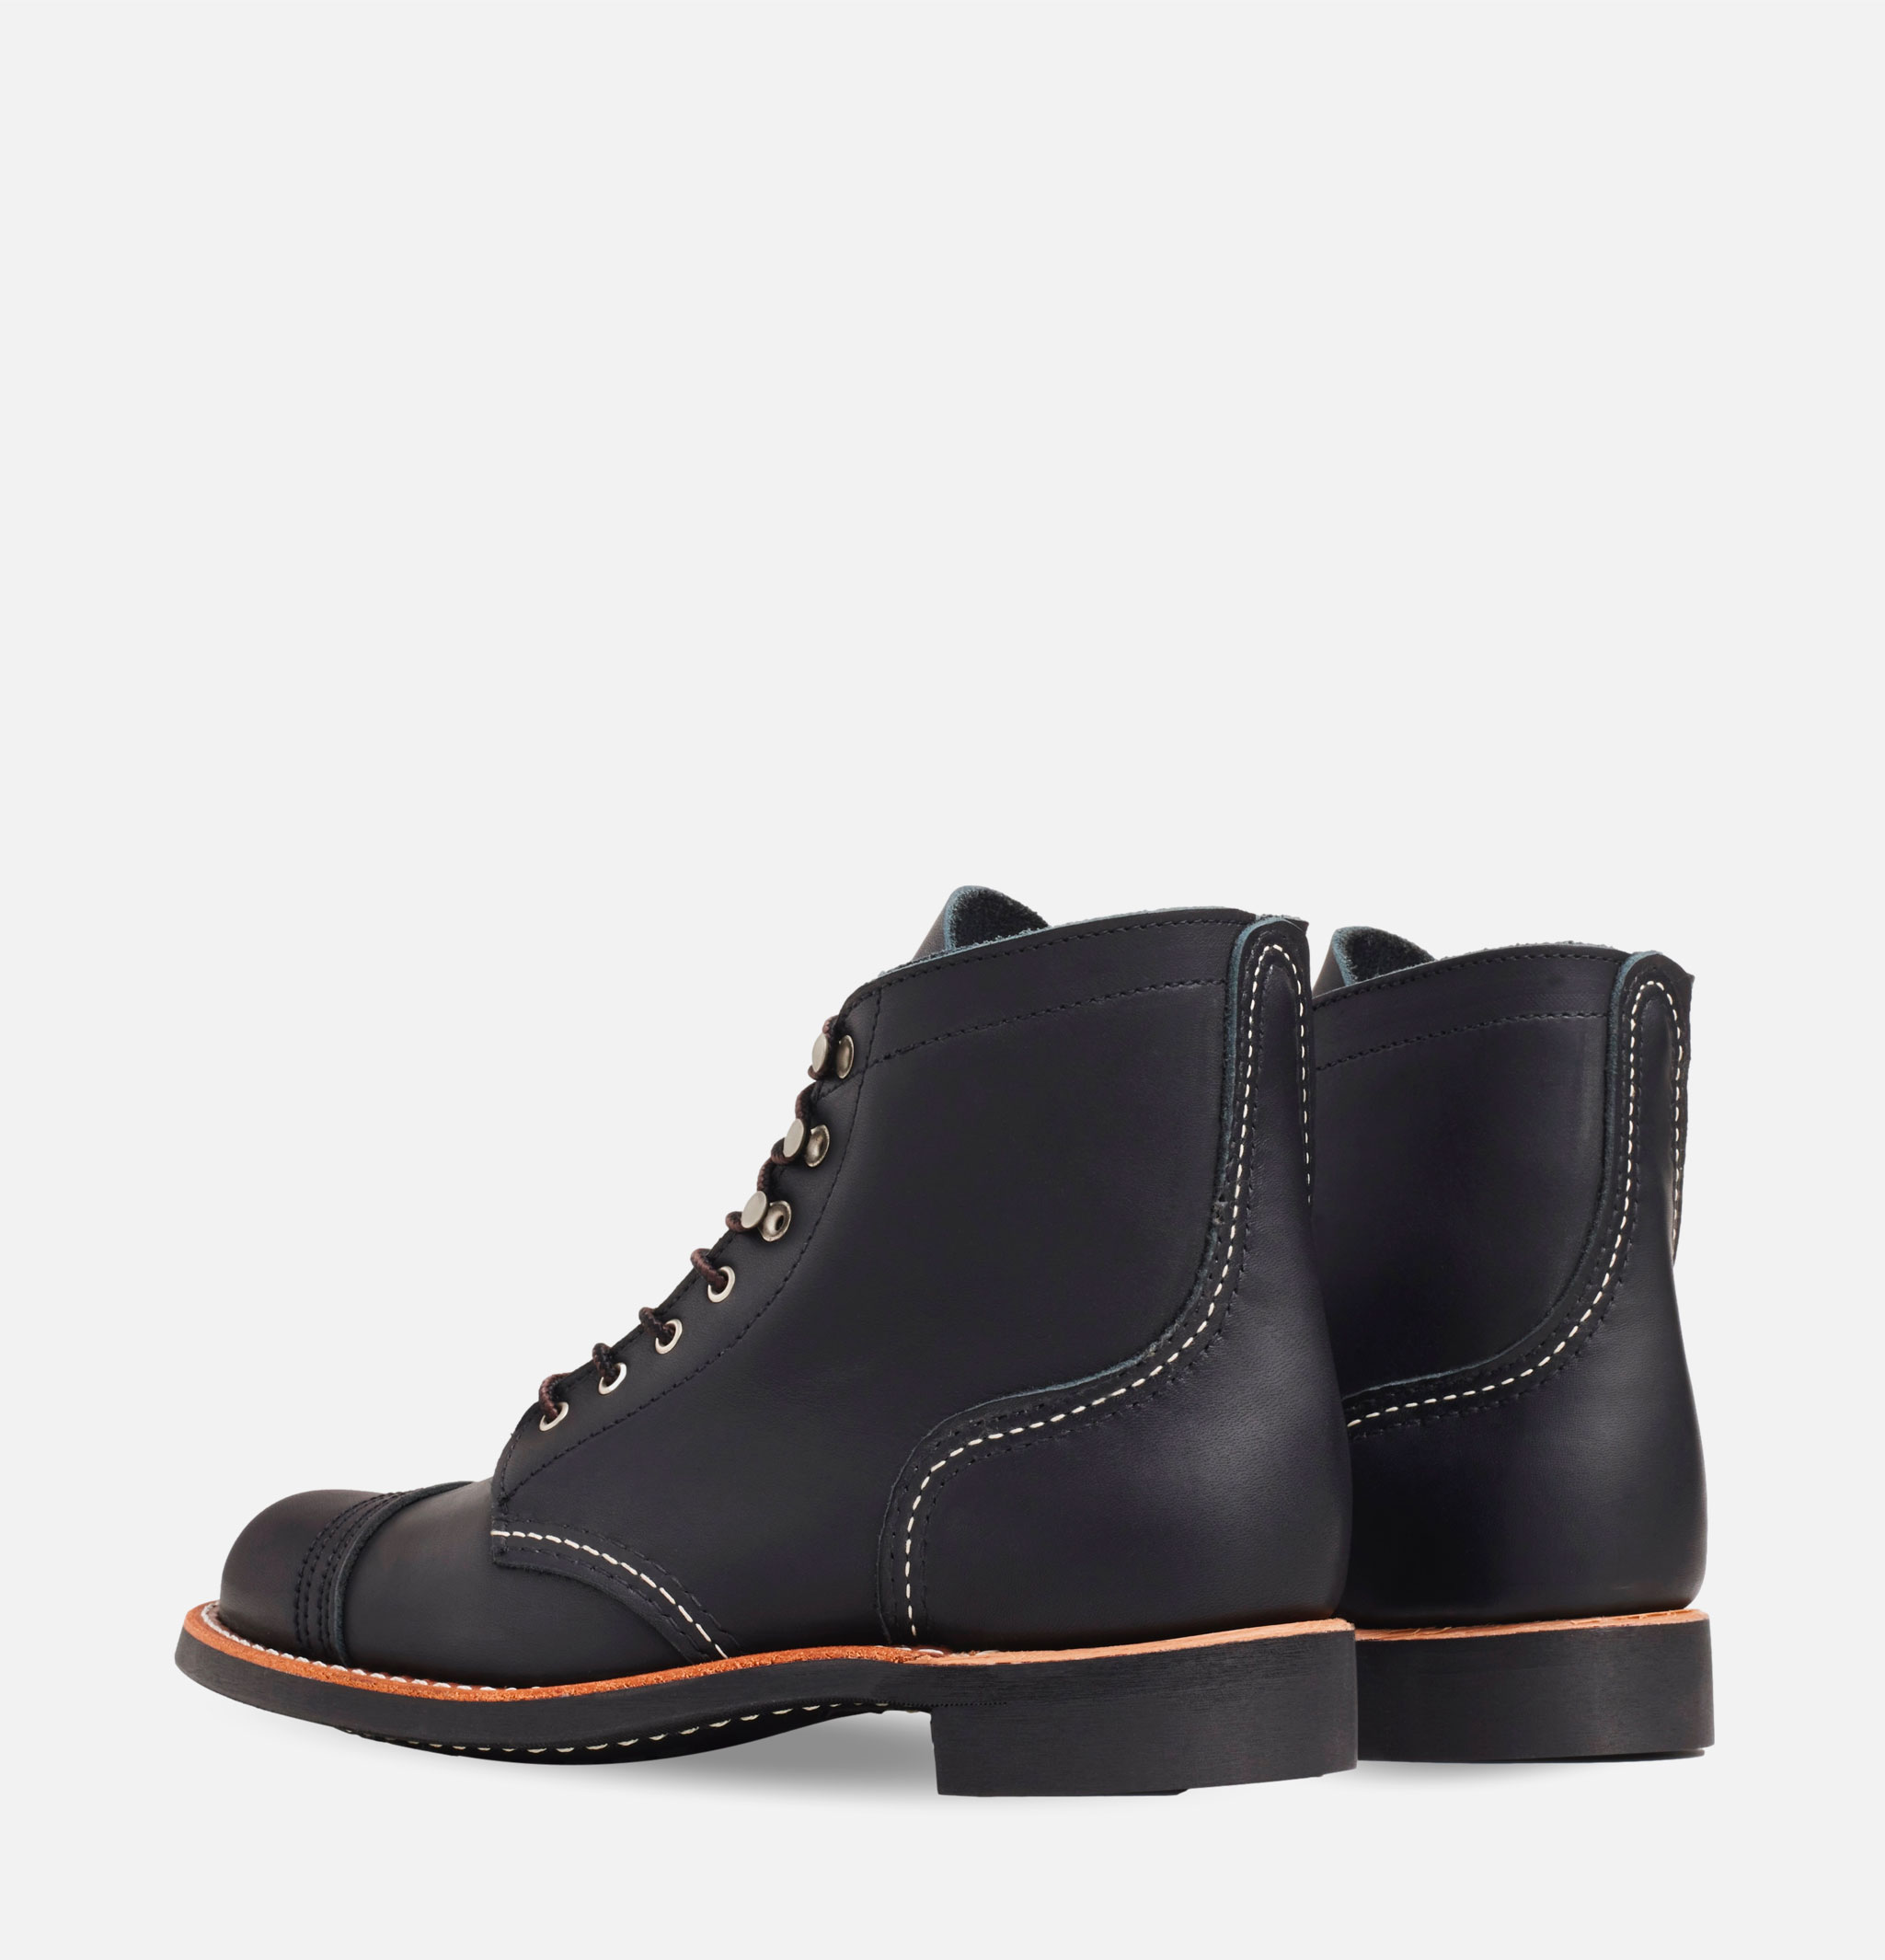 Red Wing Shoes Femme - 3366 - Iron Ranger Black